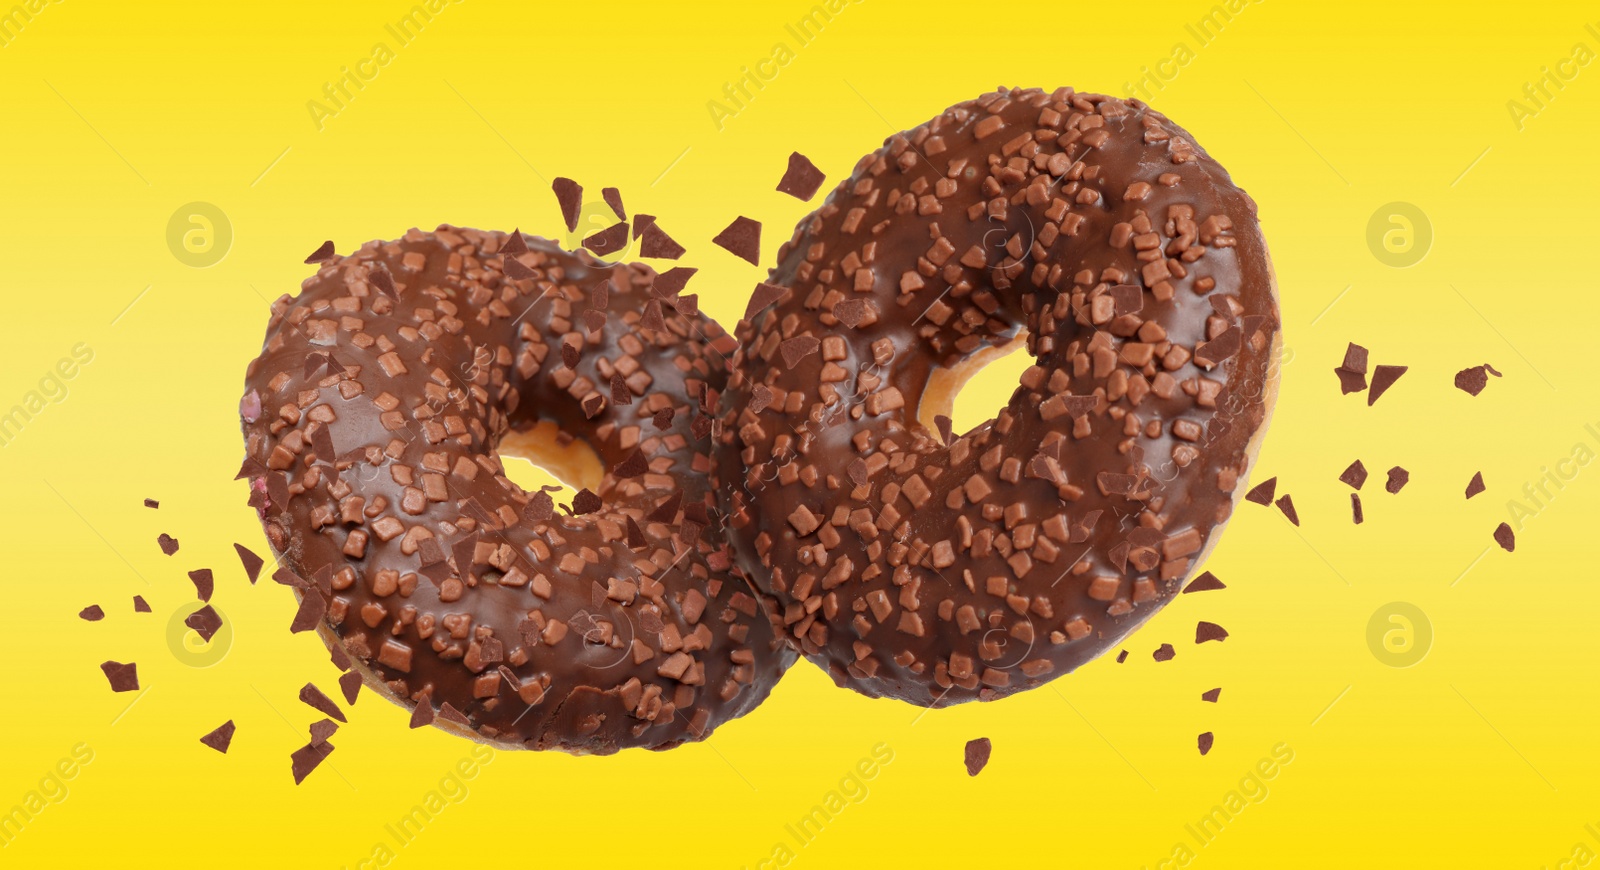 Image of Sweet delicious donuts falling on yellow background